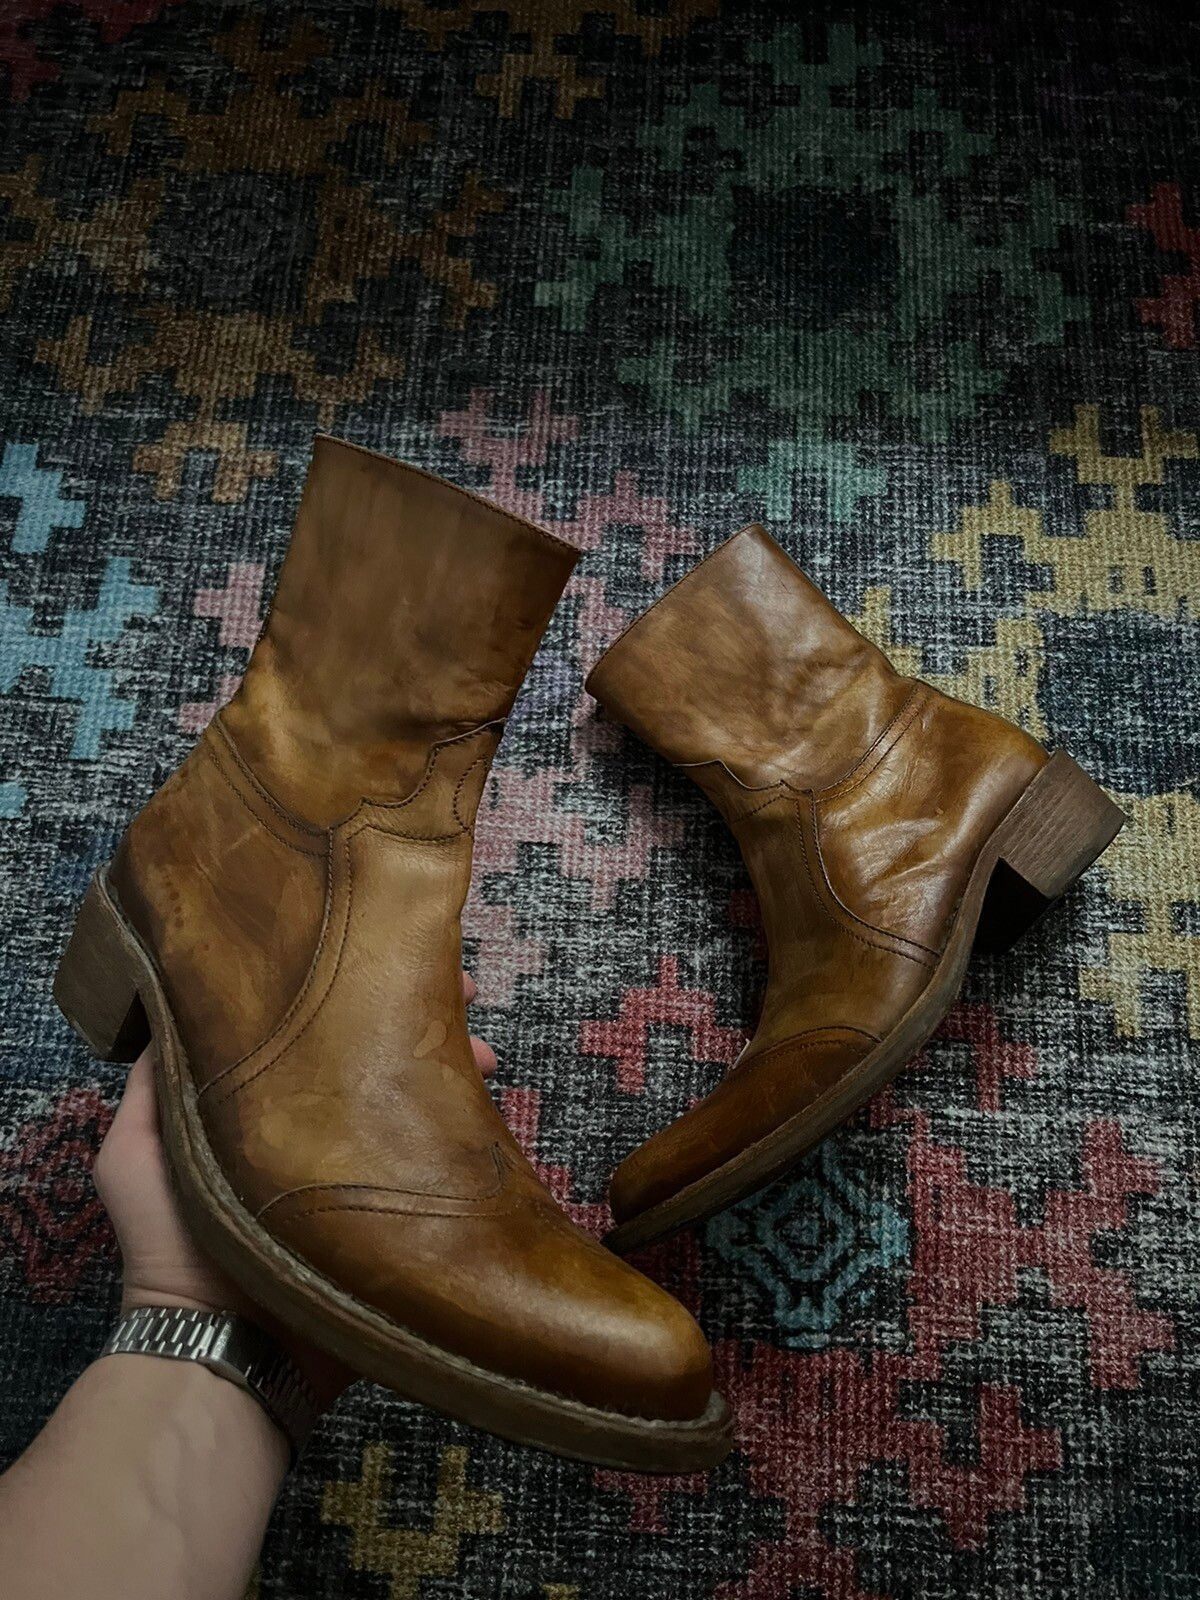 Vintage ‼️Vintage VERO CUOIO LEATHER HANDMADE ITALY MADE HIGH BOOTS‼️ Size US 9 / EU 42 - 11 Thumbnail